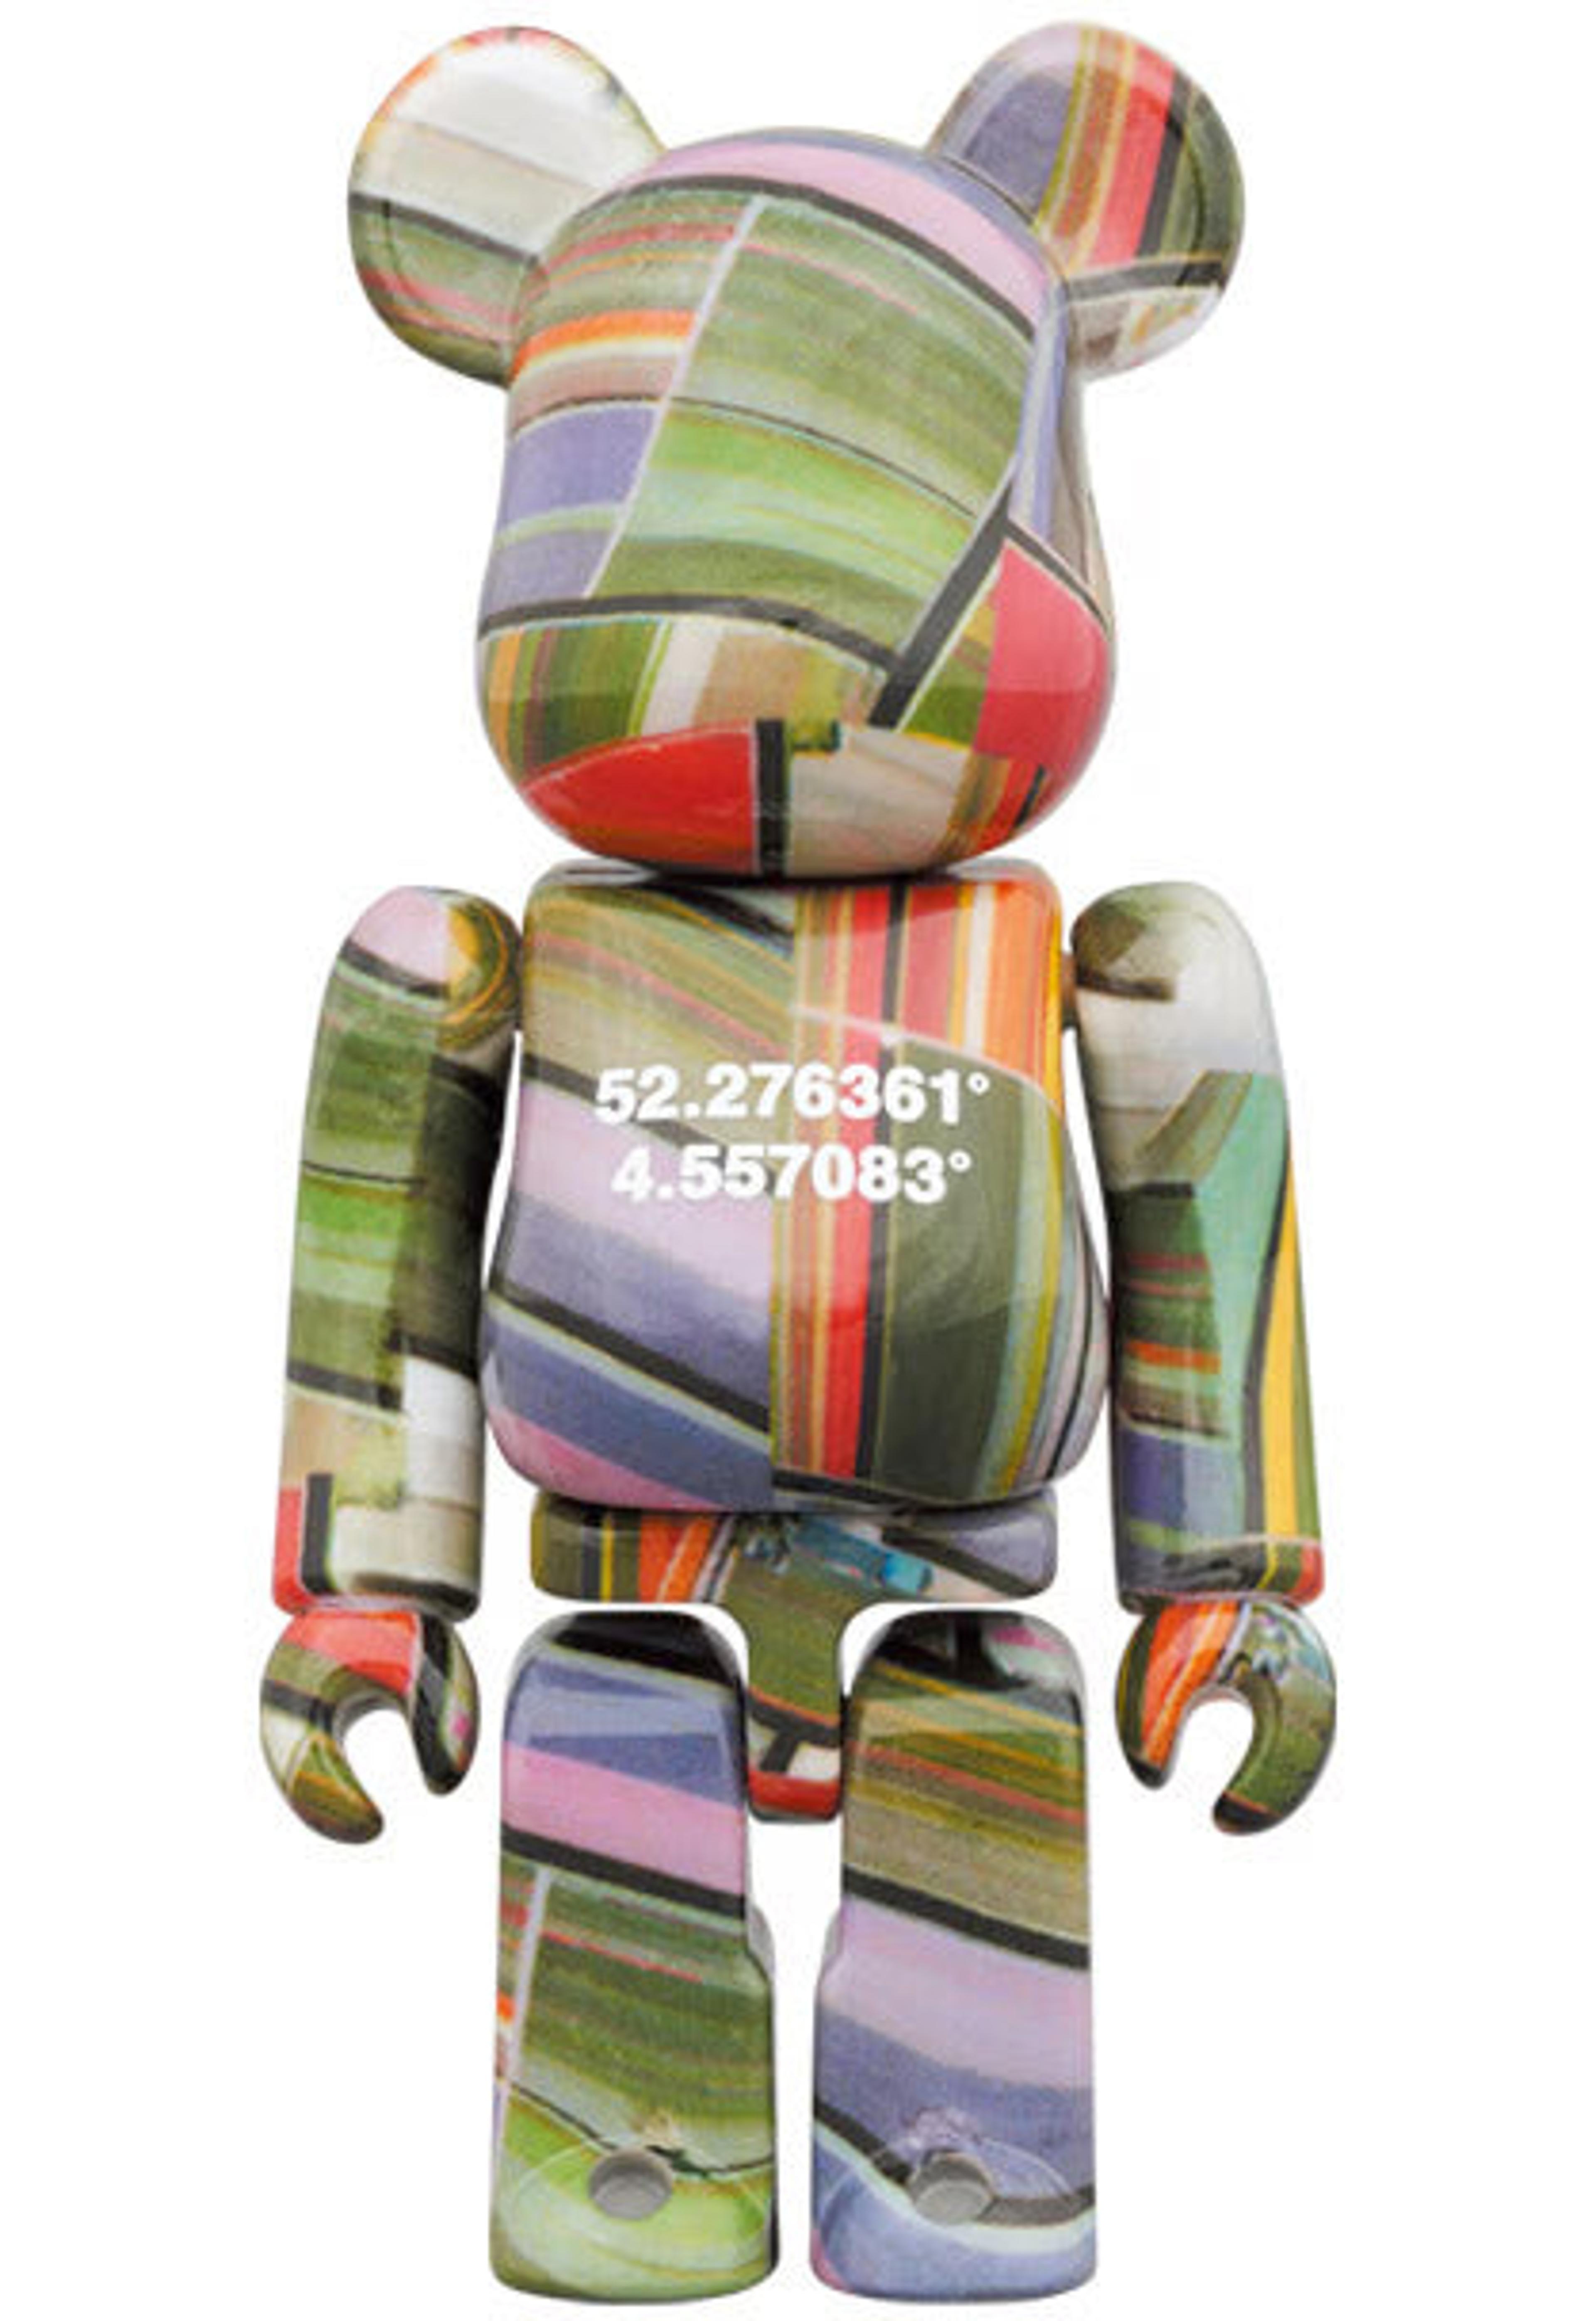 Alternate View 1 of BE@RBRICK BENJAMIN GRANT OVERVIEW LISSE 400% + 100%